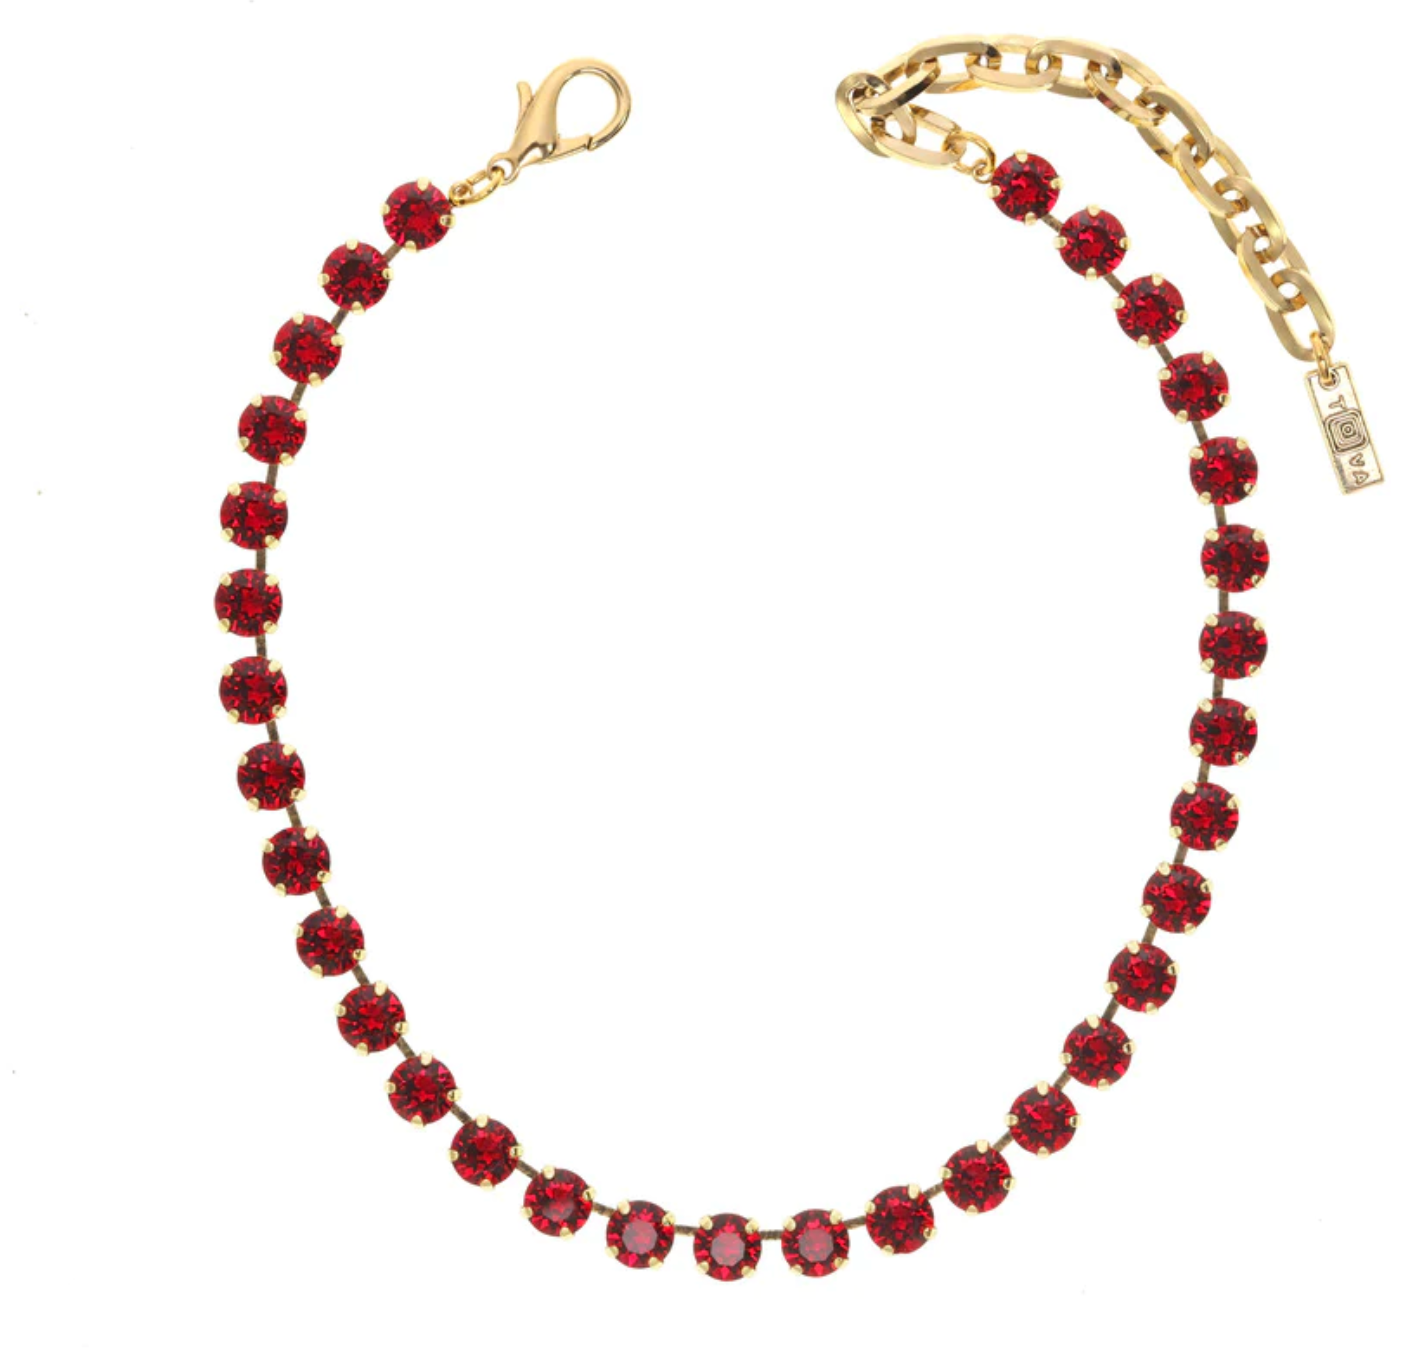 TOVA Oakland Necklace - Red